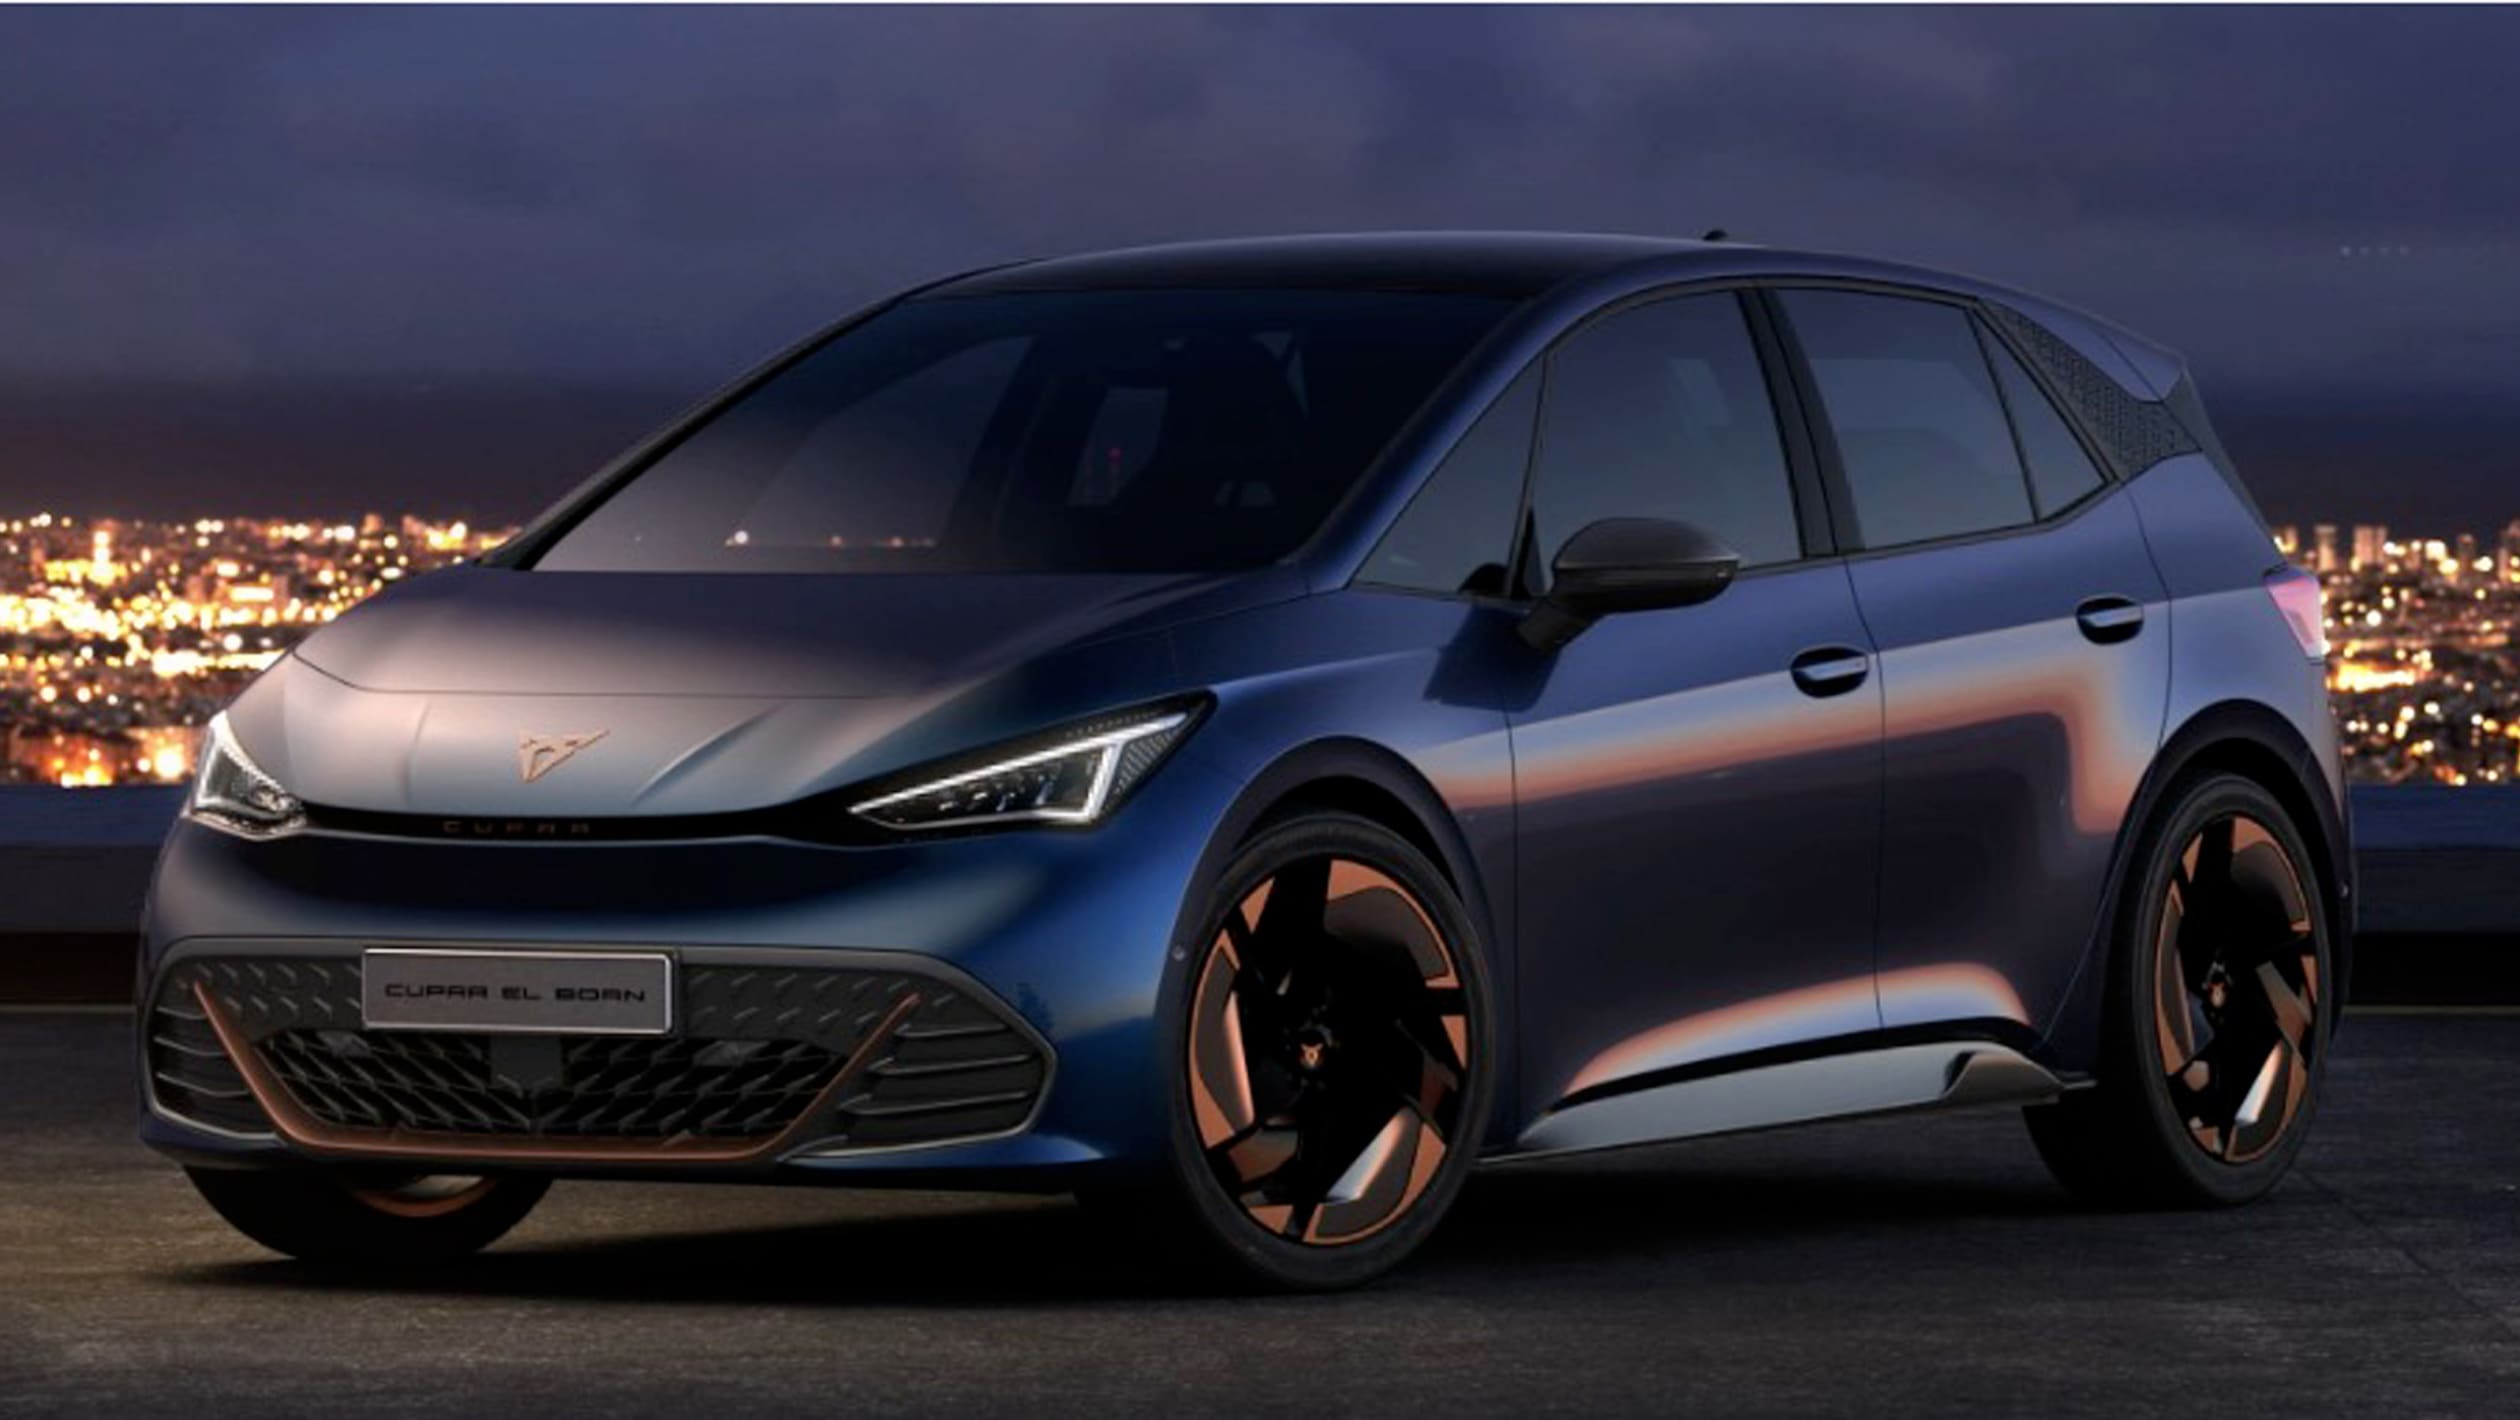 New Cupra elBorn electric hot hatch officially revealed pictures